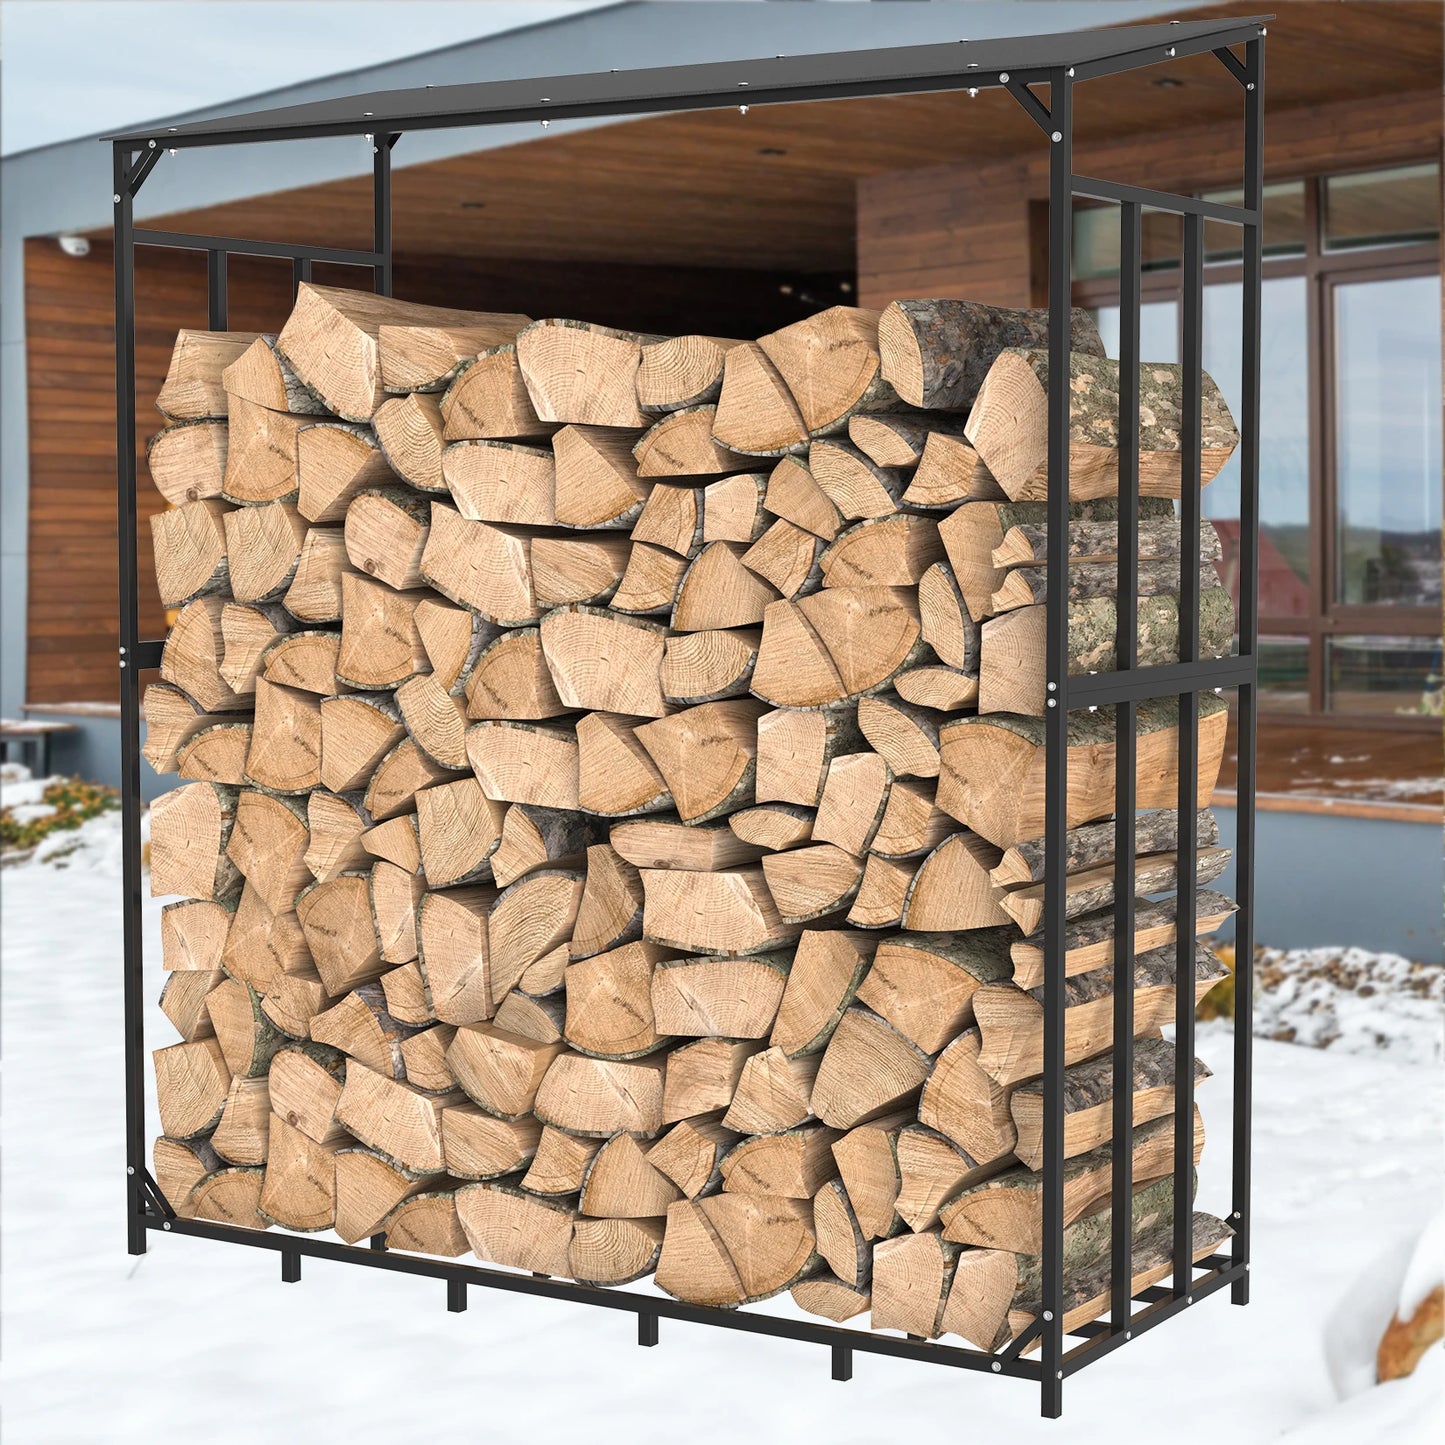 Heavy Duty Metal Firewood Rack with Top Cover